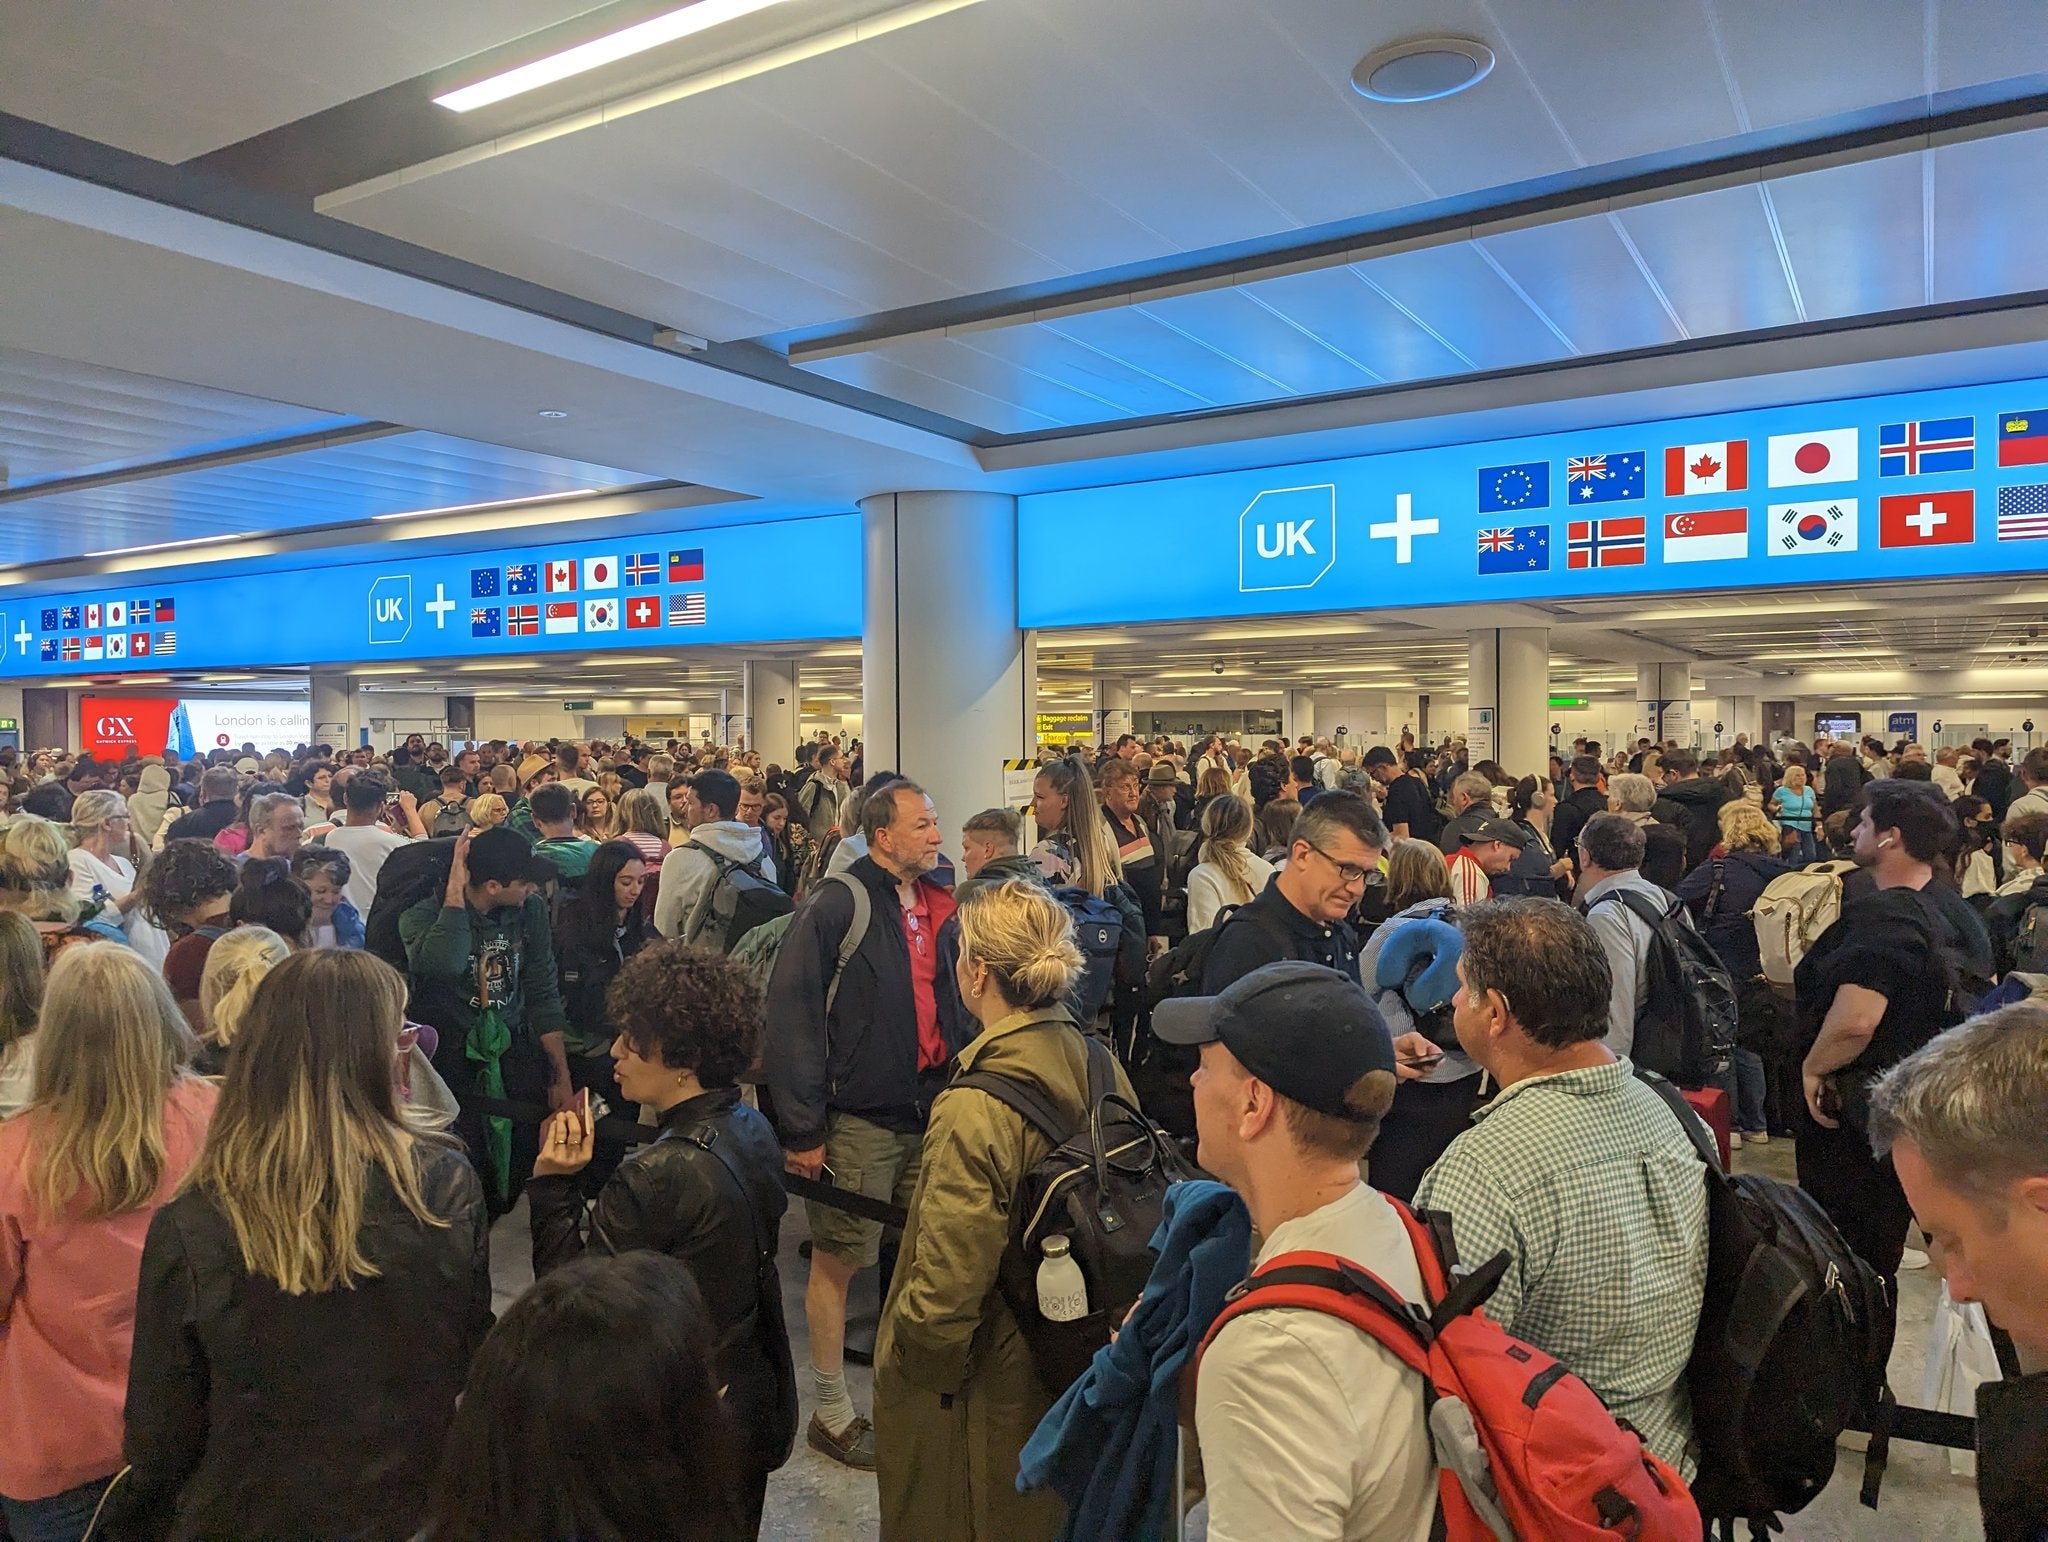 The traveller posted a series of pictures of people waiting at border control in long queues on Twitter, with the caption, “Absolute chaos at Gatwick”